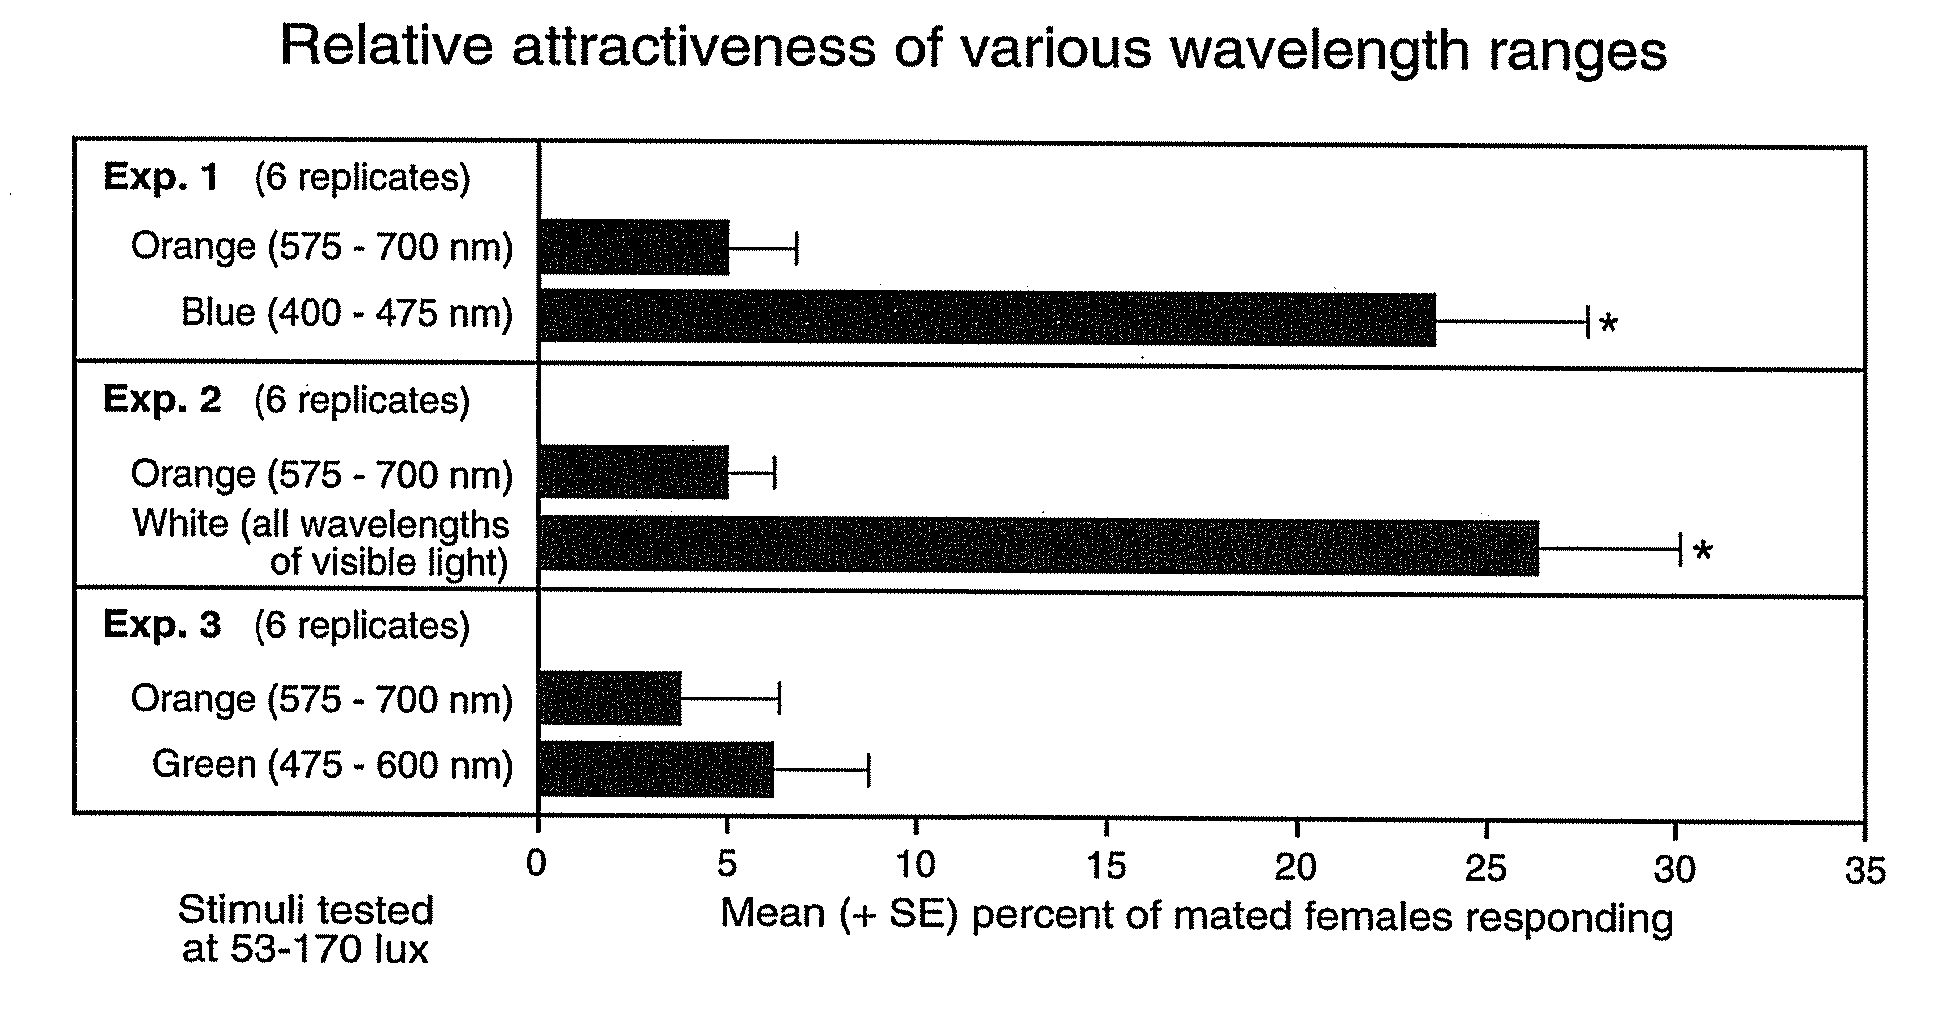 Apparatus and Method for Emitting Specific Wavelengths of Visible Light to Manipulate the Behavior of Stored Product Insect Pests